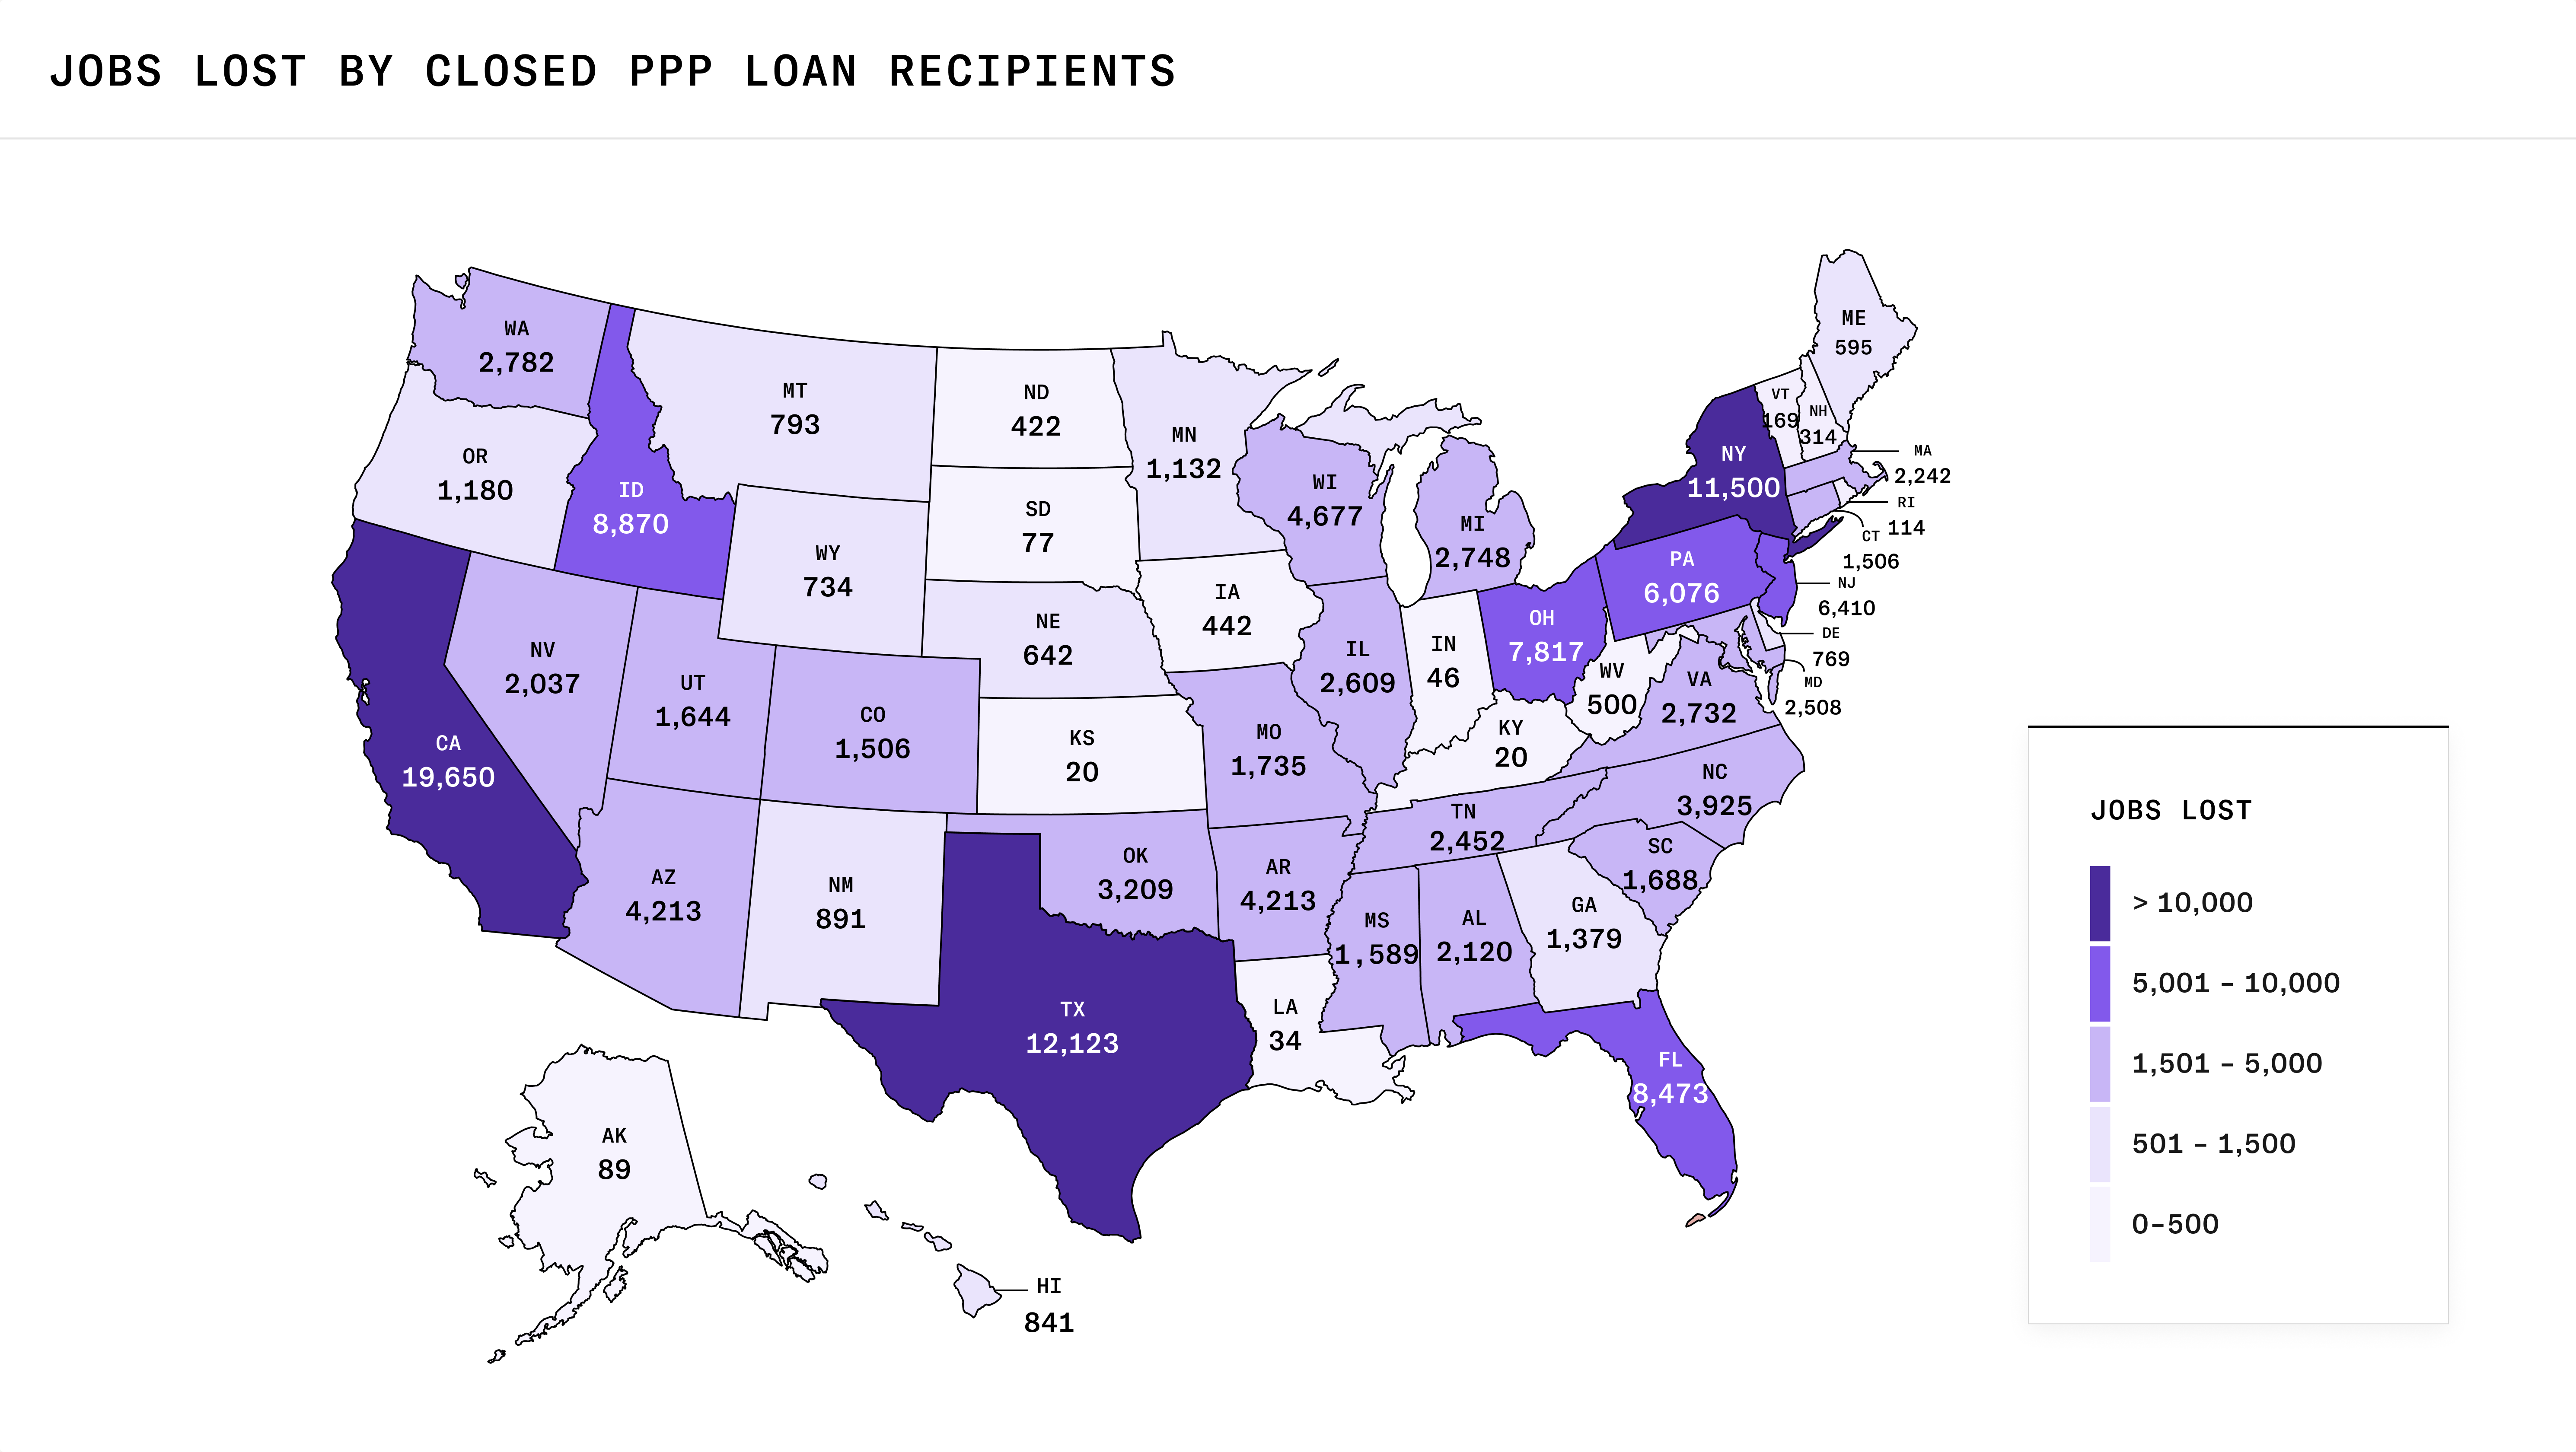 Visualization depicting jobs lost by now-closed PPP loan recipients